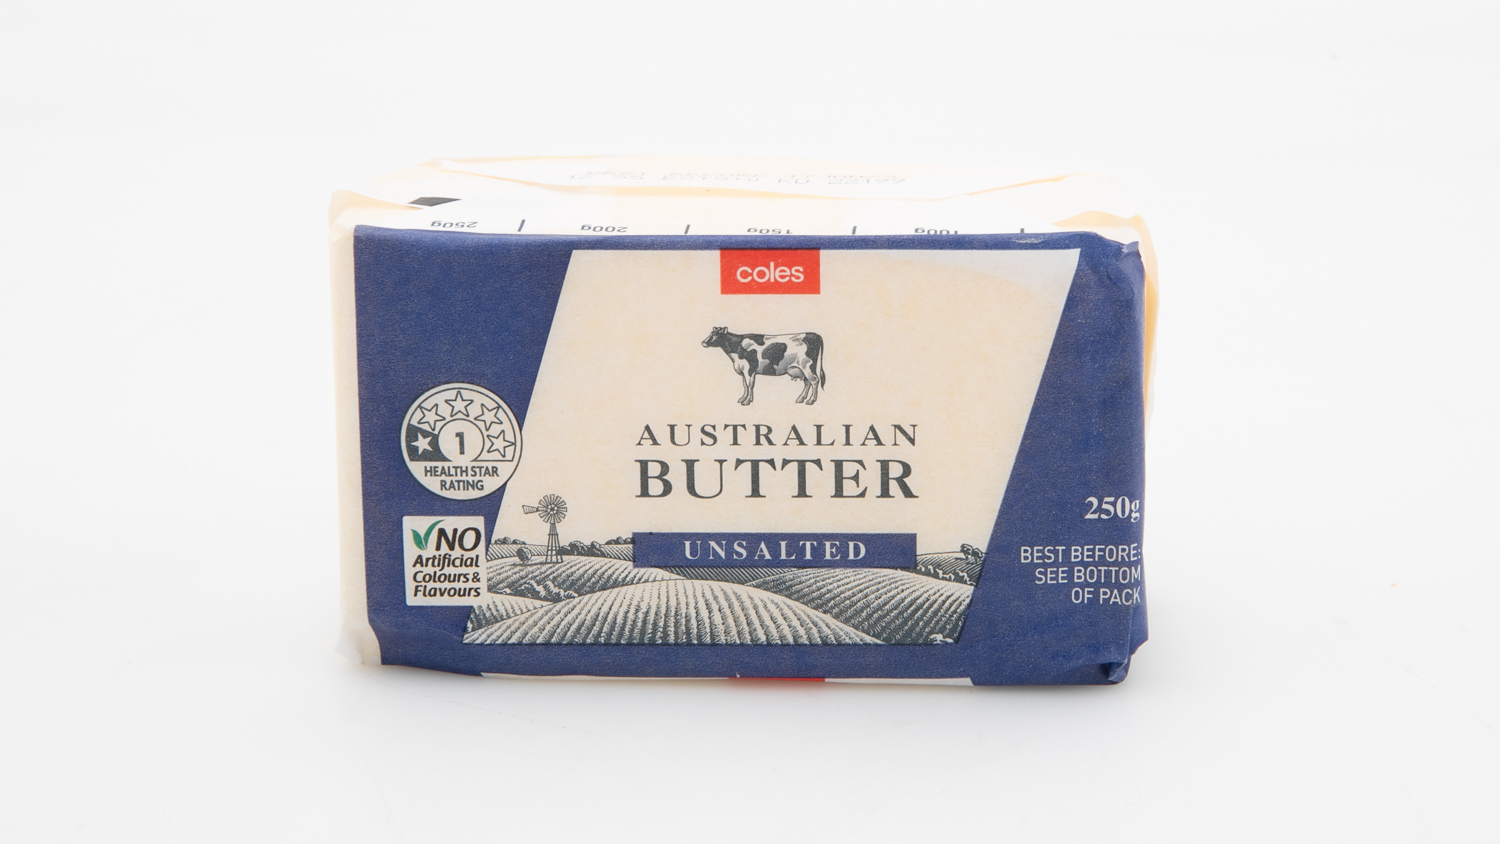 Coles Australian Butter Unsalted carousel image